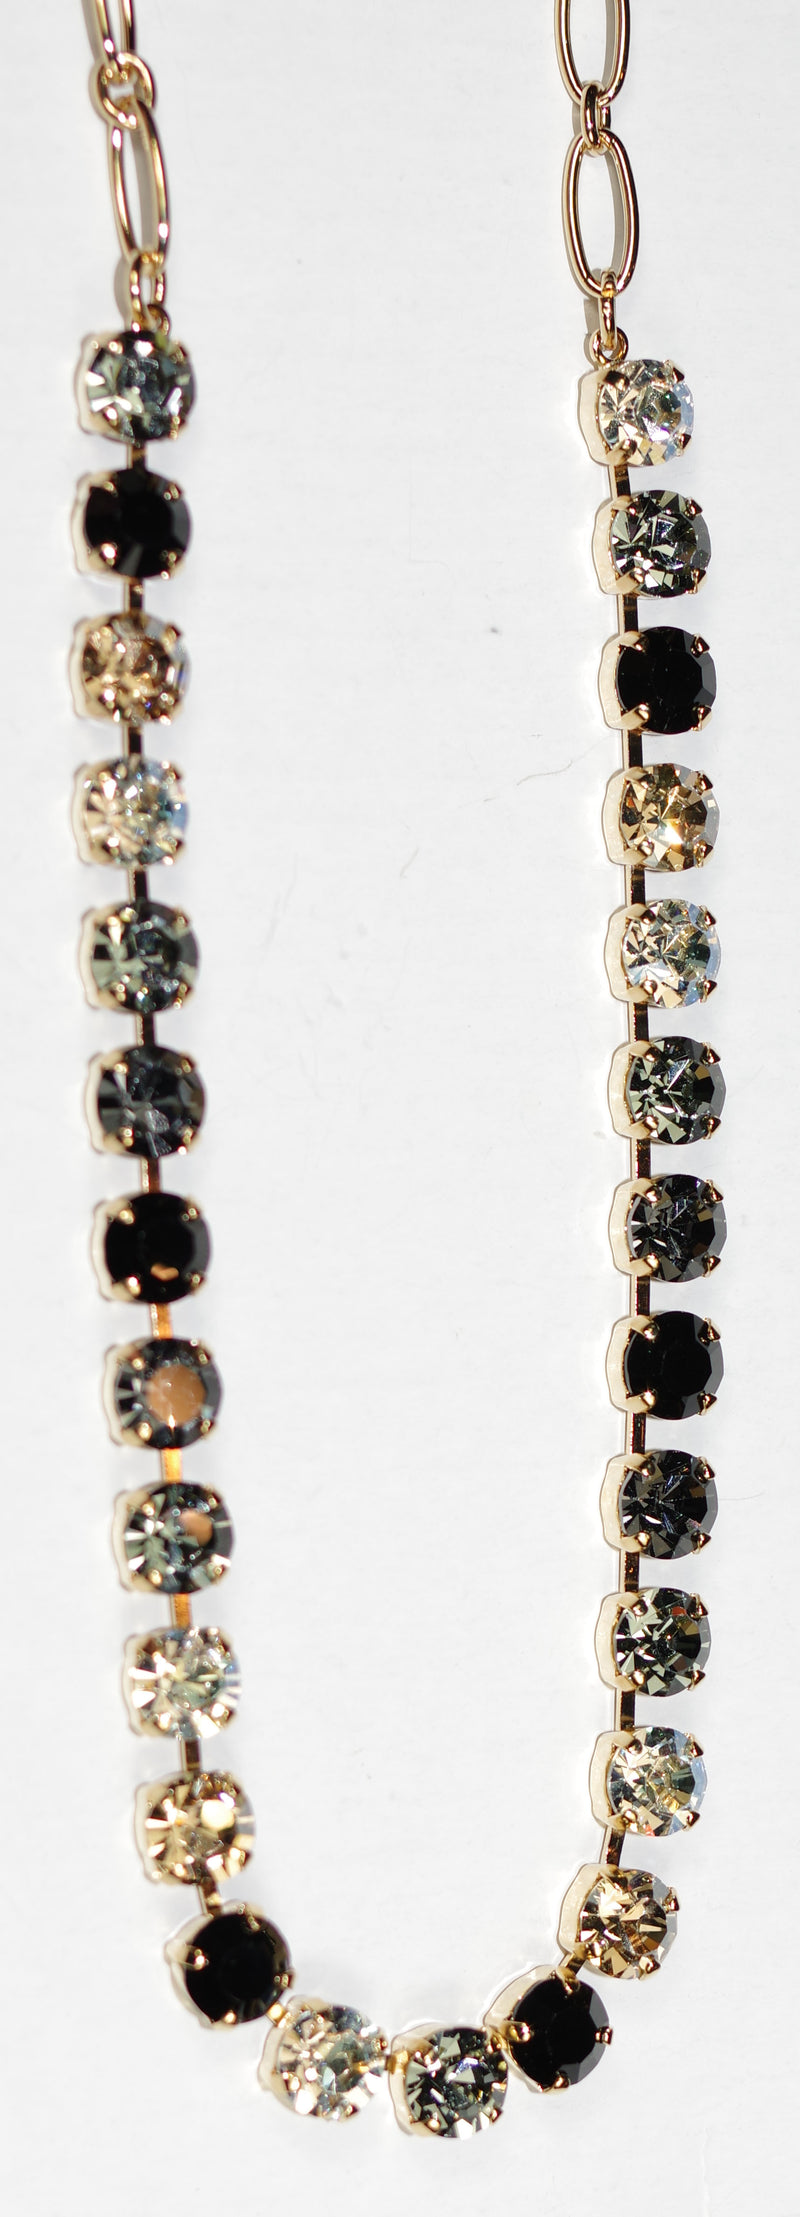 MARIANA NECKLACE BETTE BLACK ORCHID: taupe, black, clear, amber stones in yellow gold setting, 17" adjustable chain